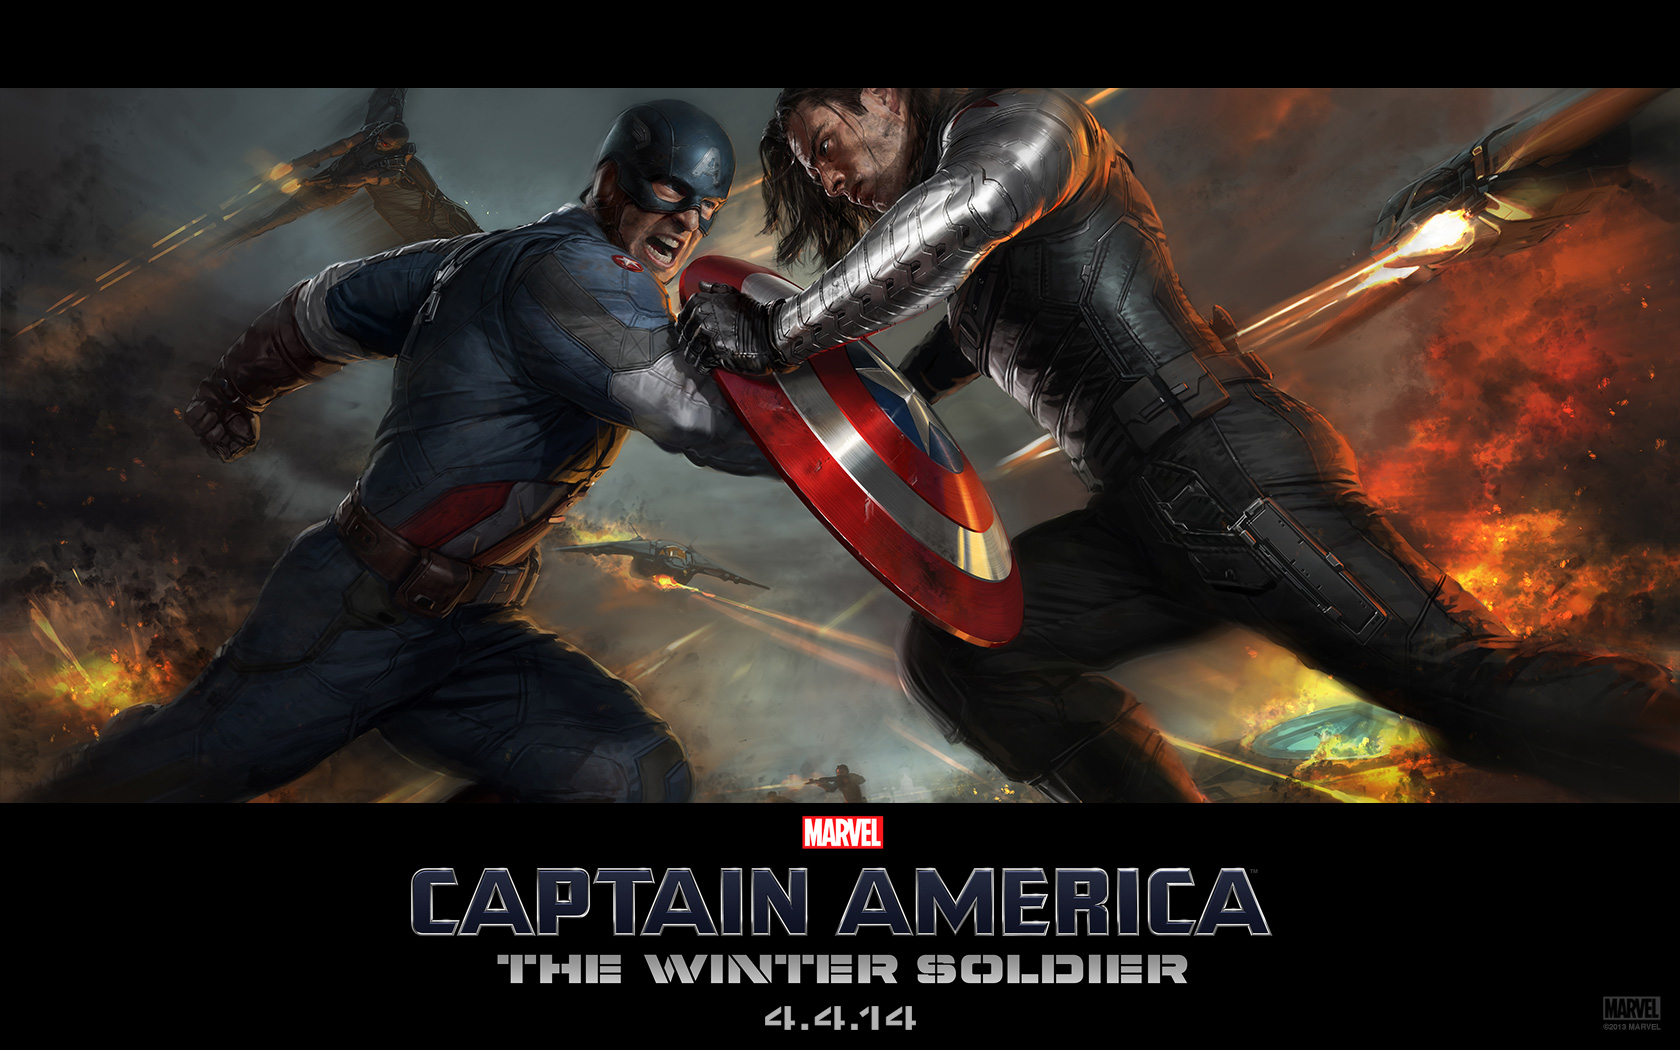 Captain America: The Winter Soldier Picture by Ryan Meinerding